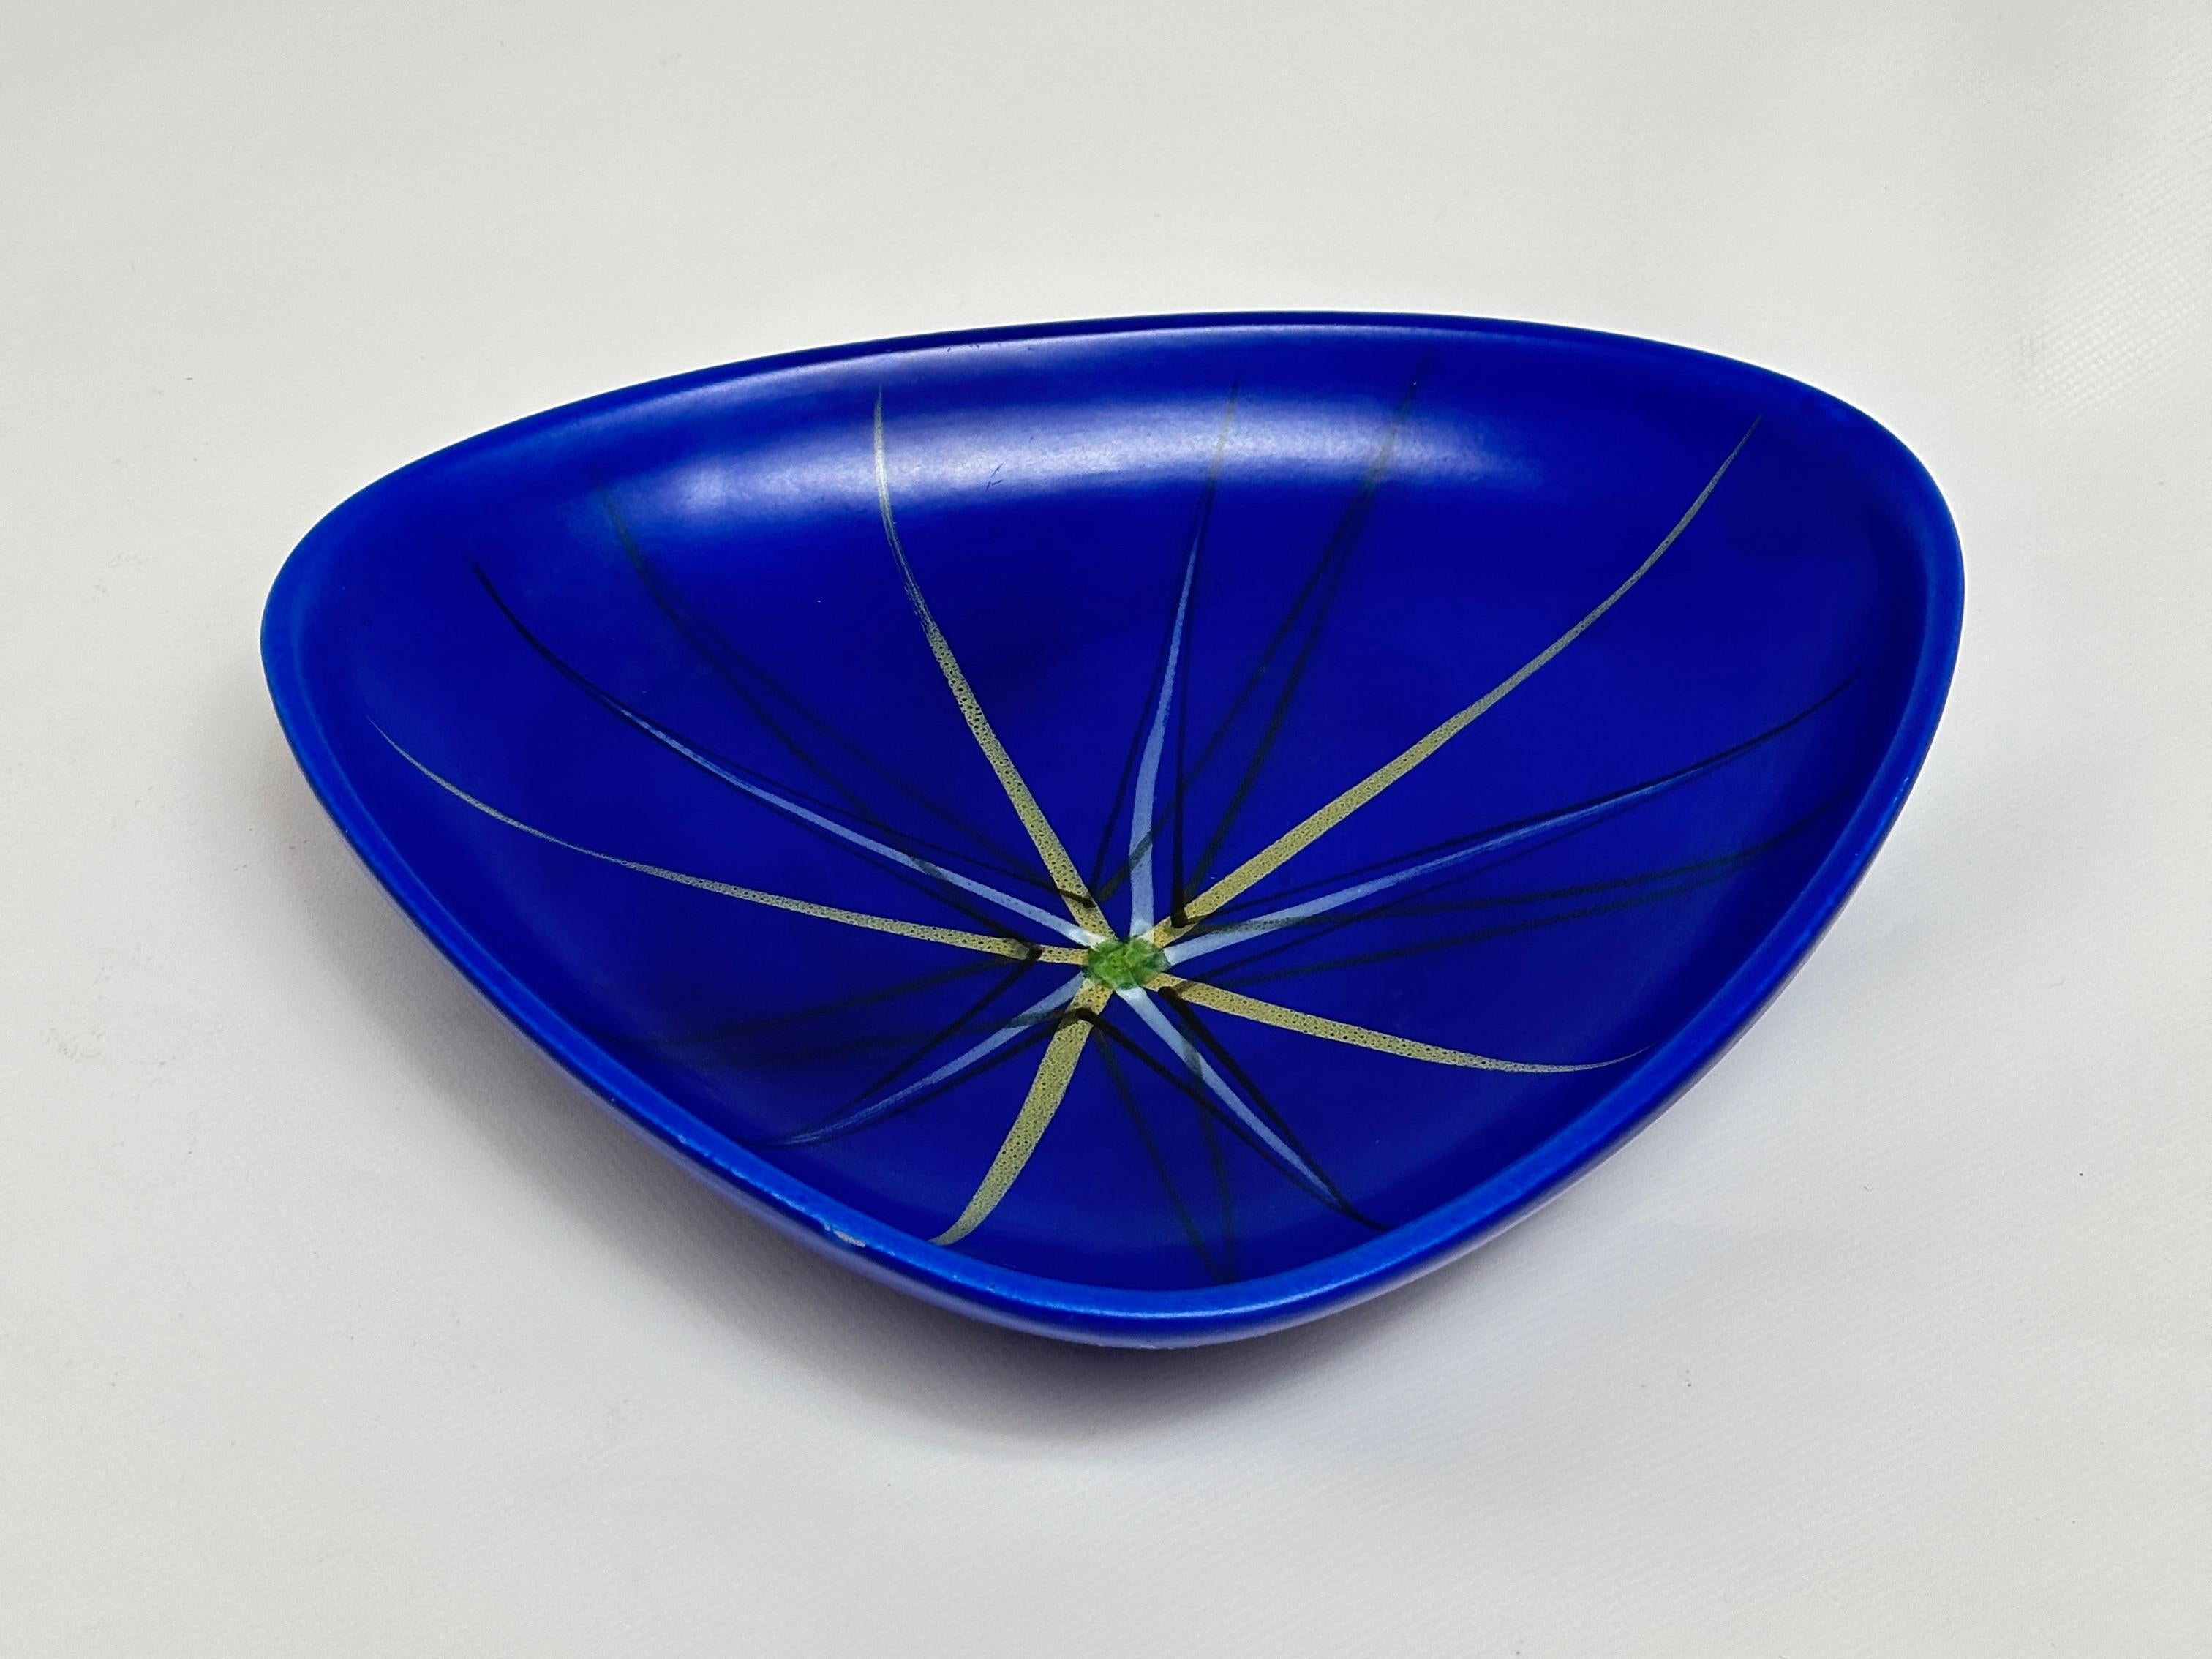 Glazed Large Free-Form Decorative Bowl, Andre Baud, Vallauris c. 1950 For Sale